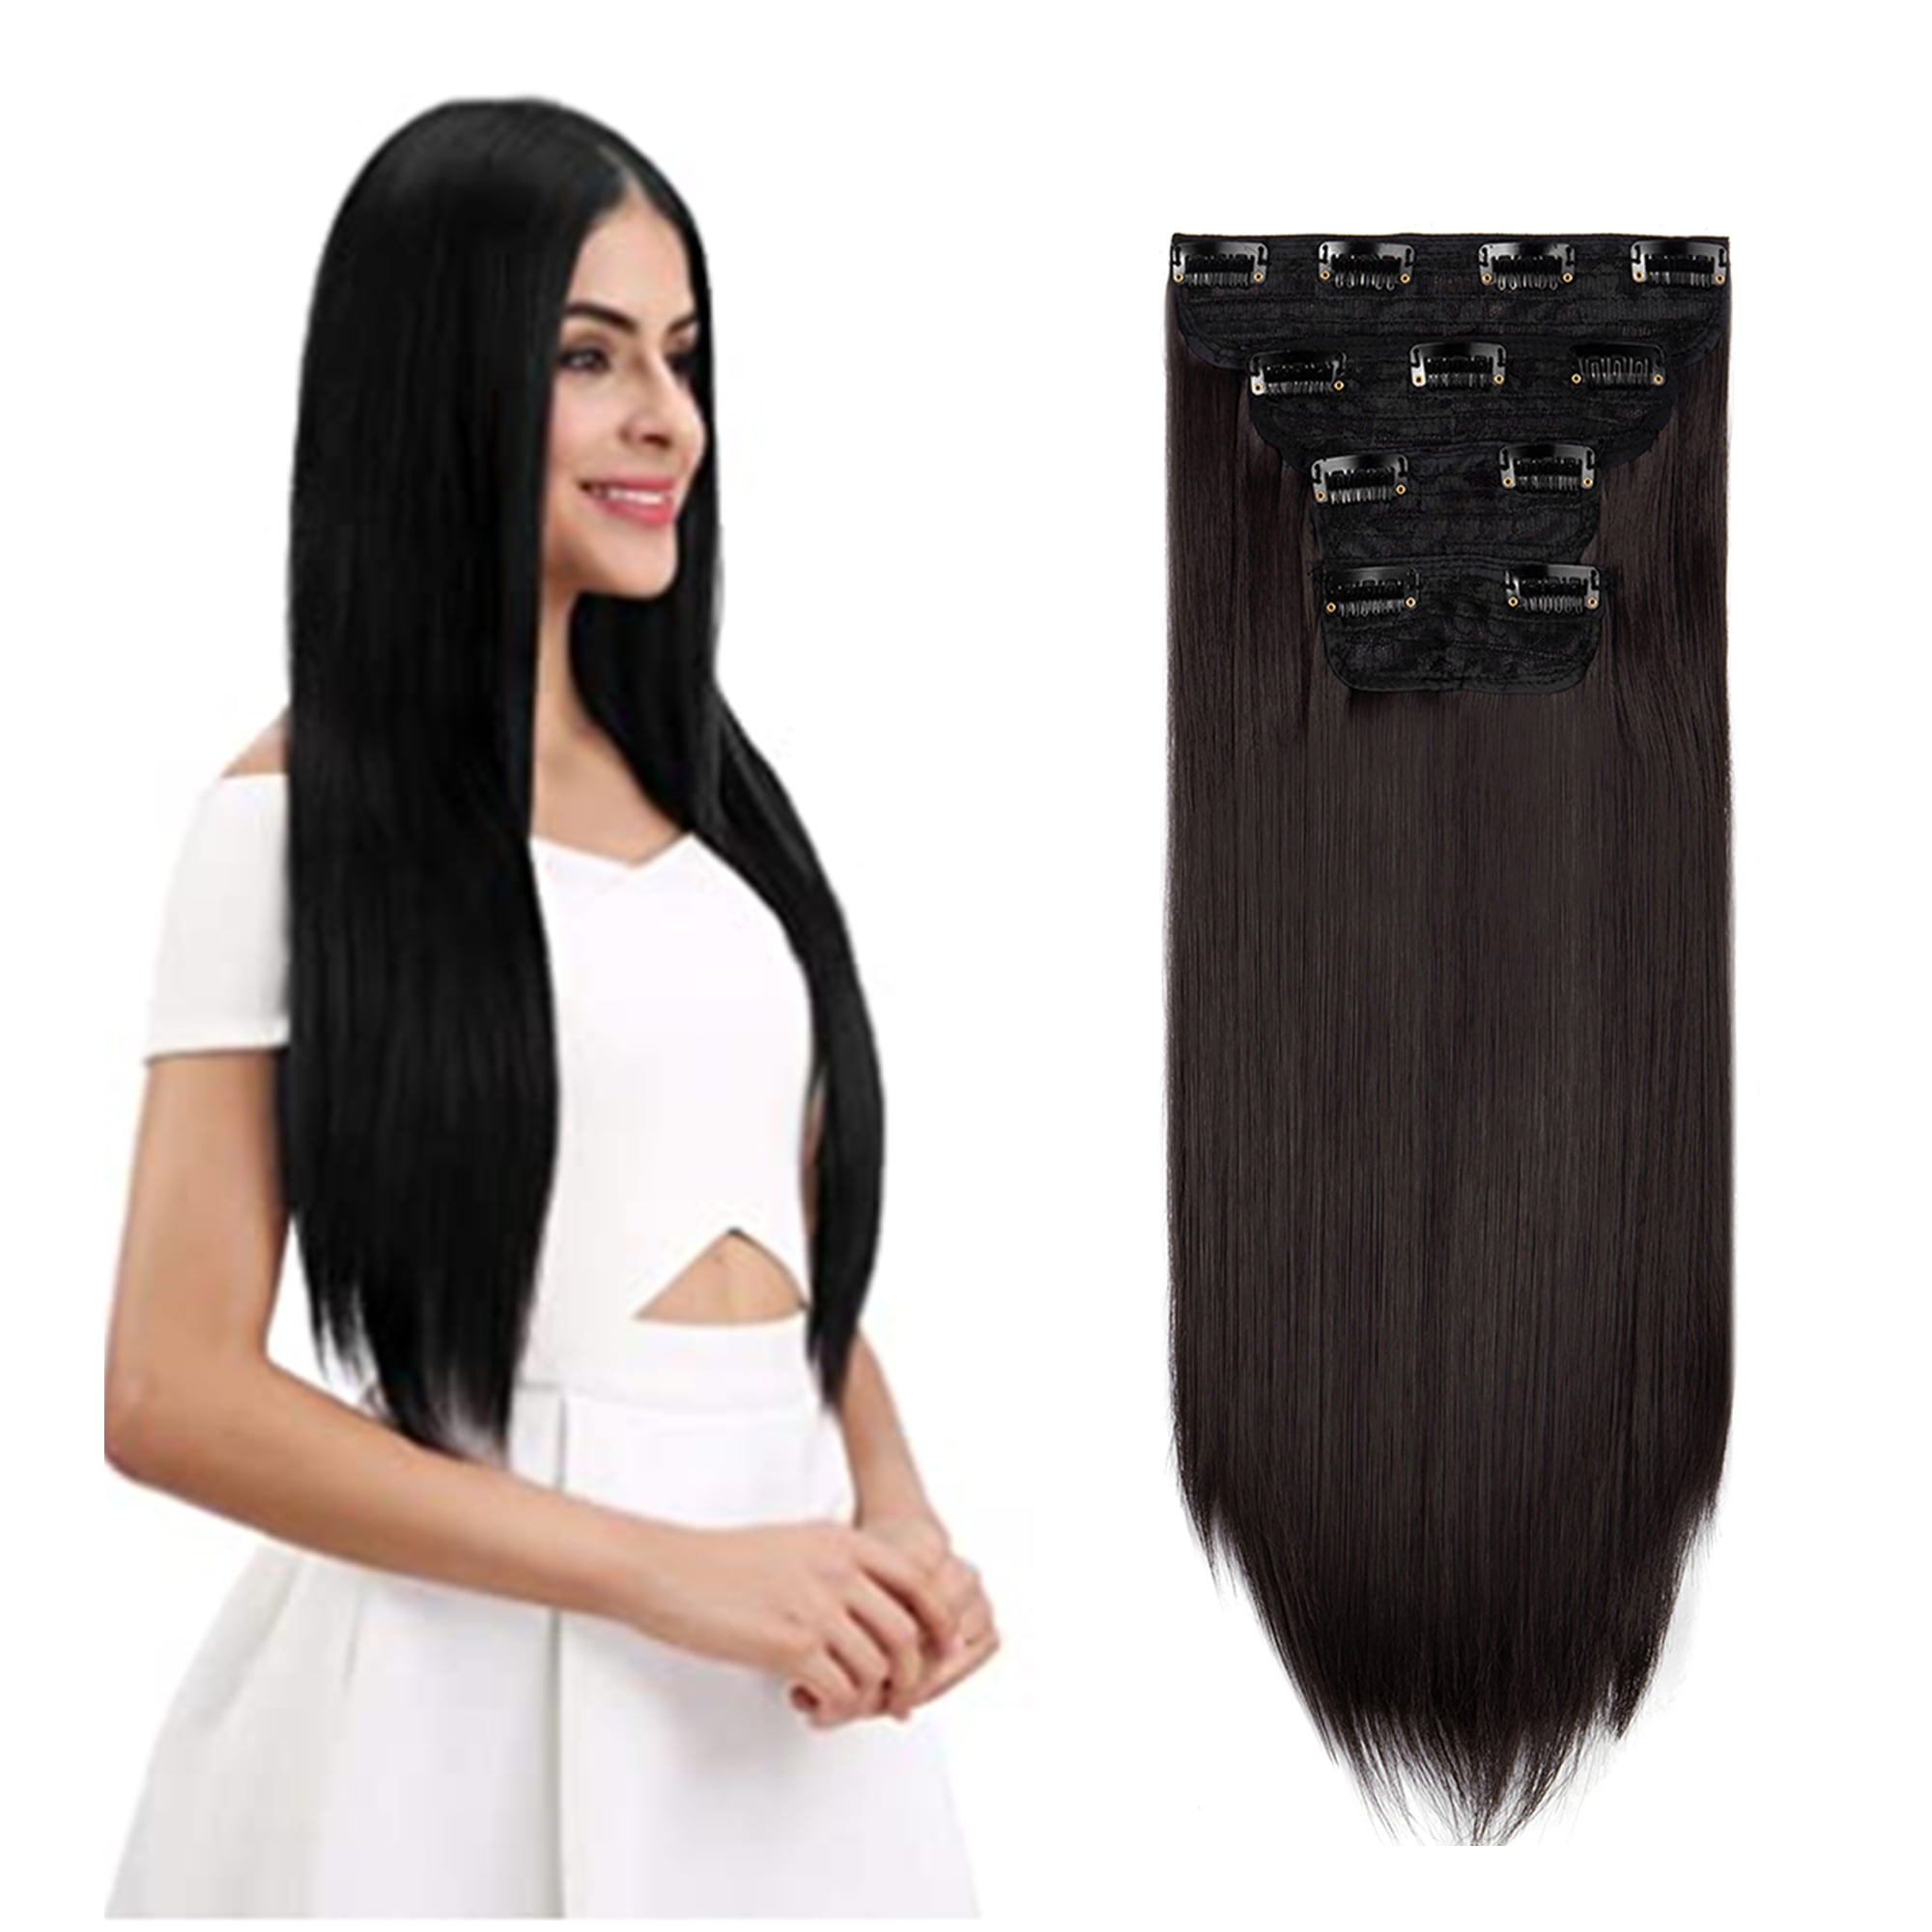 4Pcs Clip in Straight Hair Extensions, Natural Straight Hairpieces with